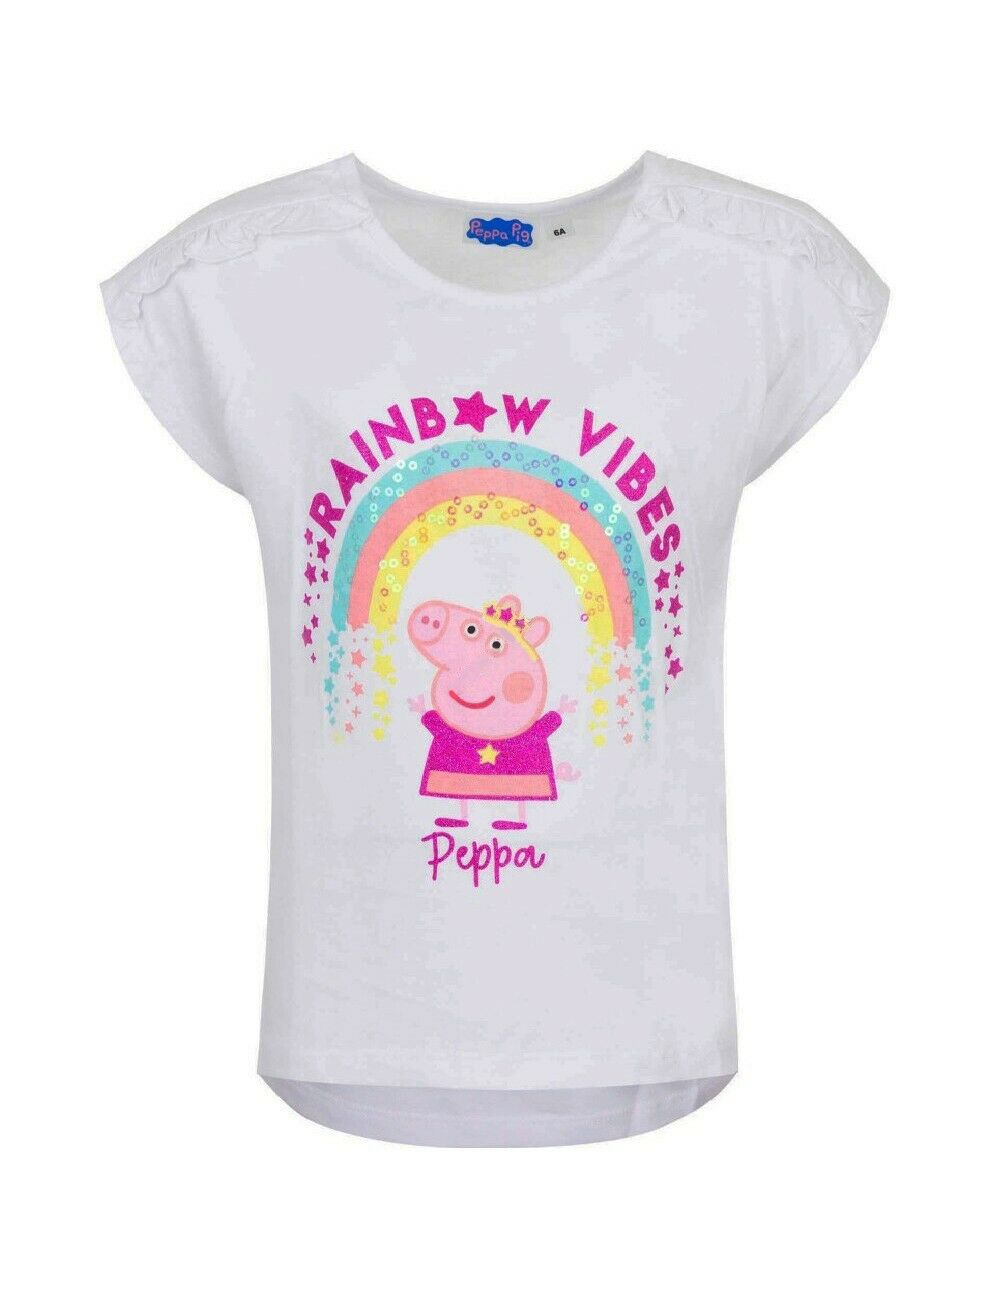 Peppa Pig Short Sleeve T-Shirts. Perfect For Any Peppa Pig Fan Available In White. Age 3 to 6 Available. This Is Official Merchandise